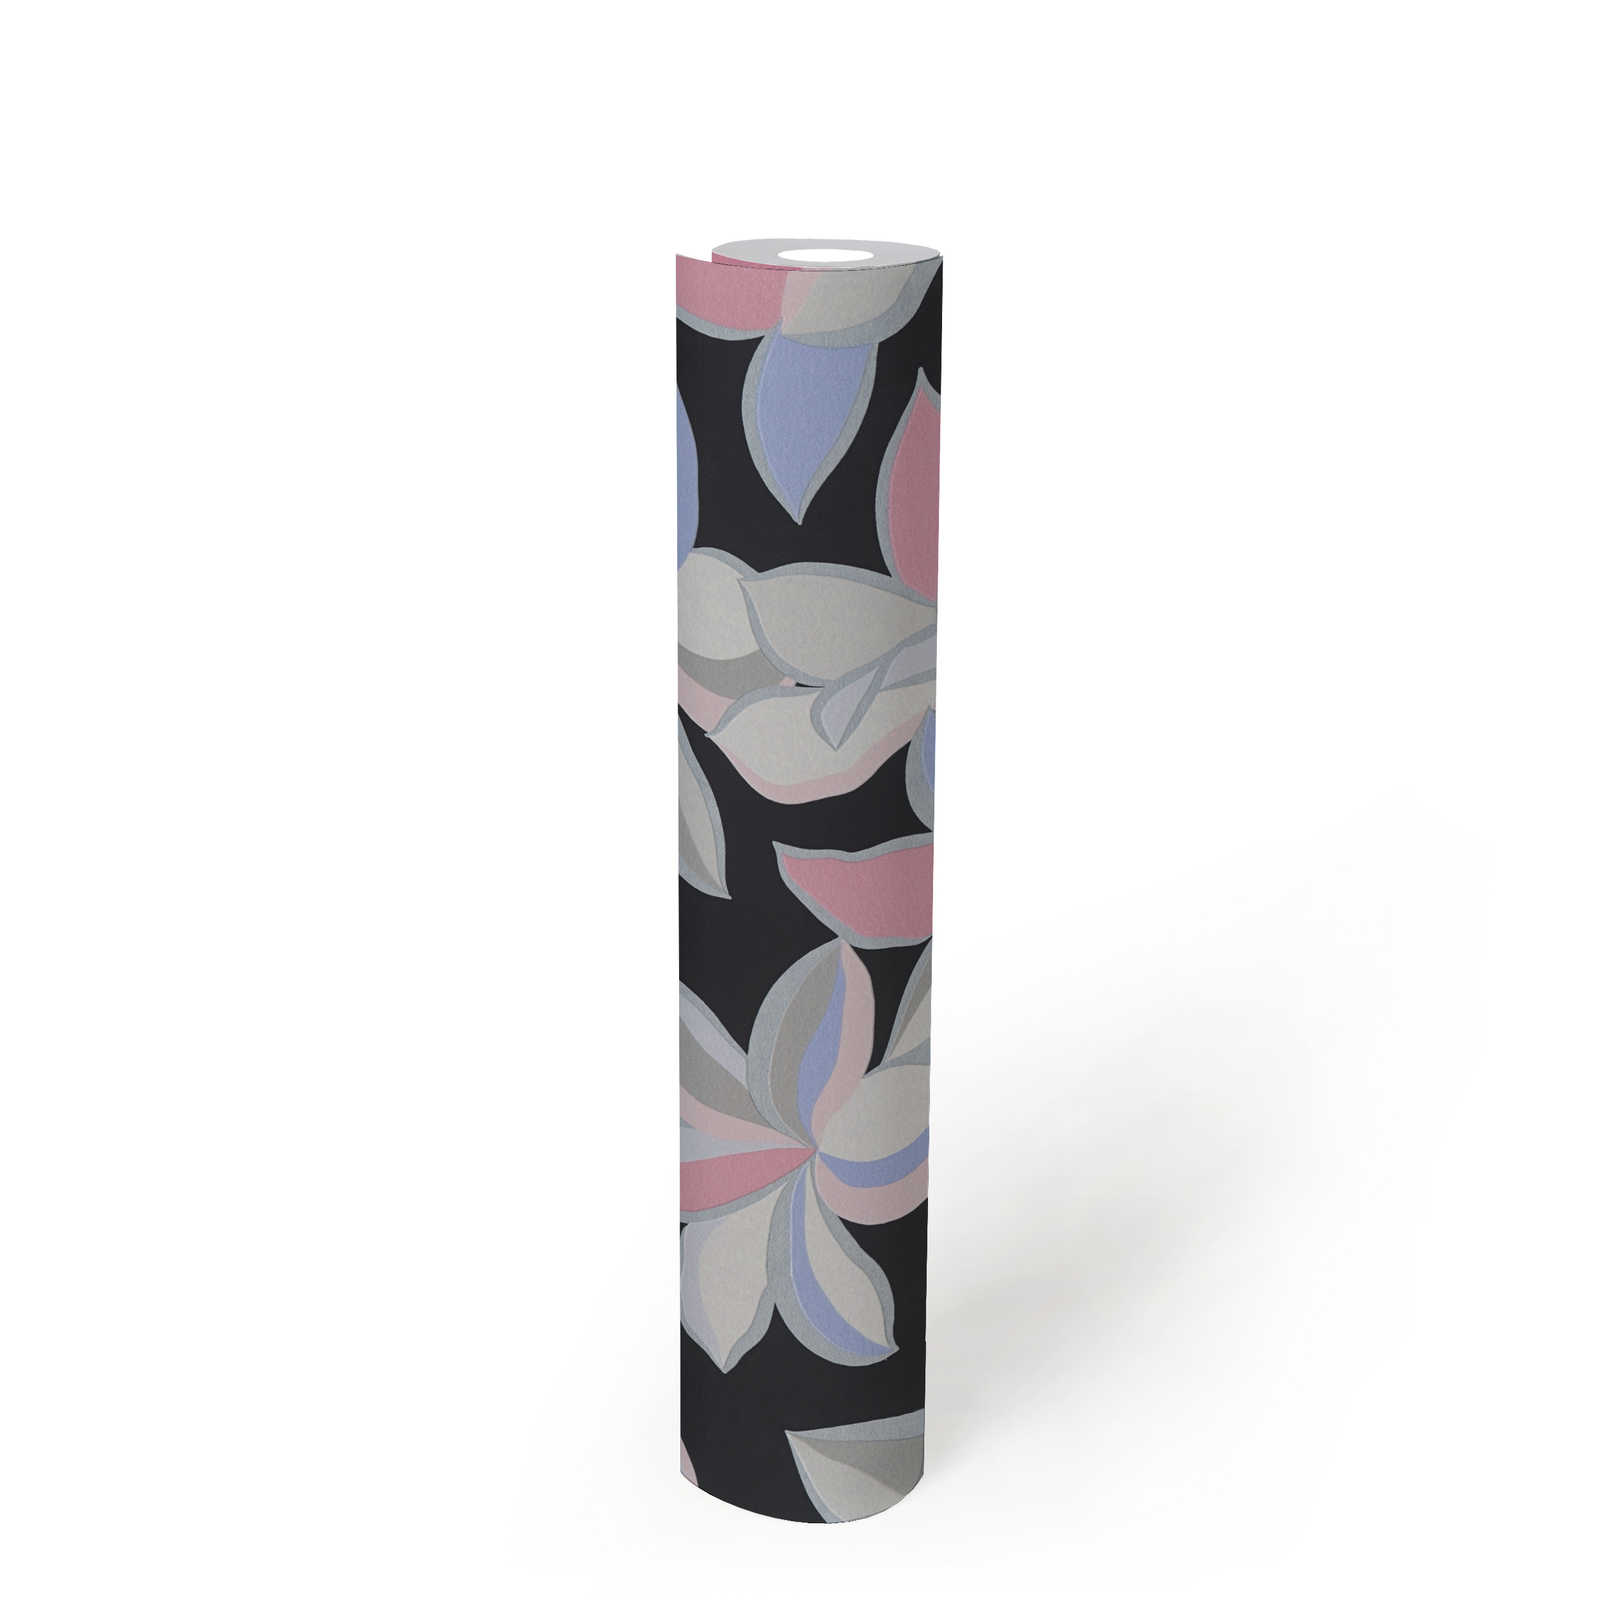             Floral pattern with glossy effect and fine texture - black, grey, pink
        